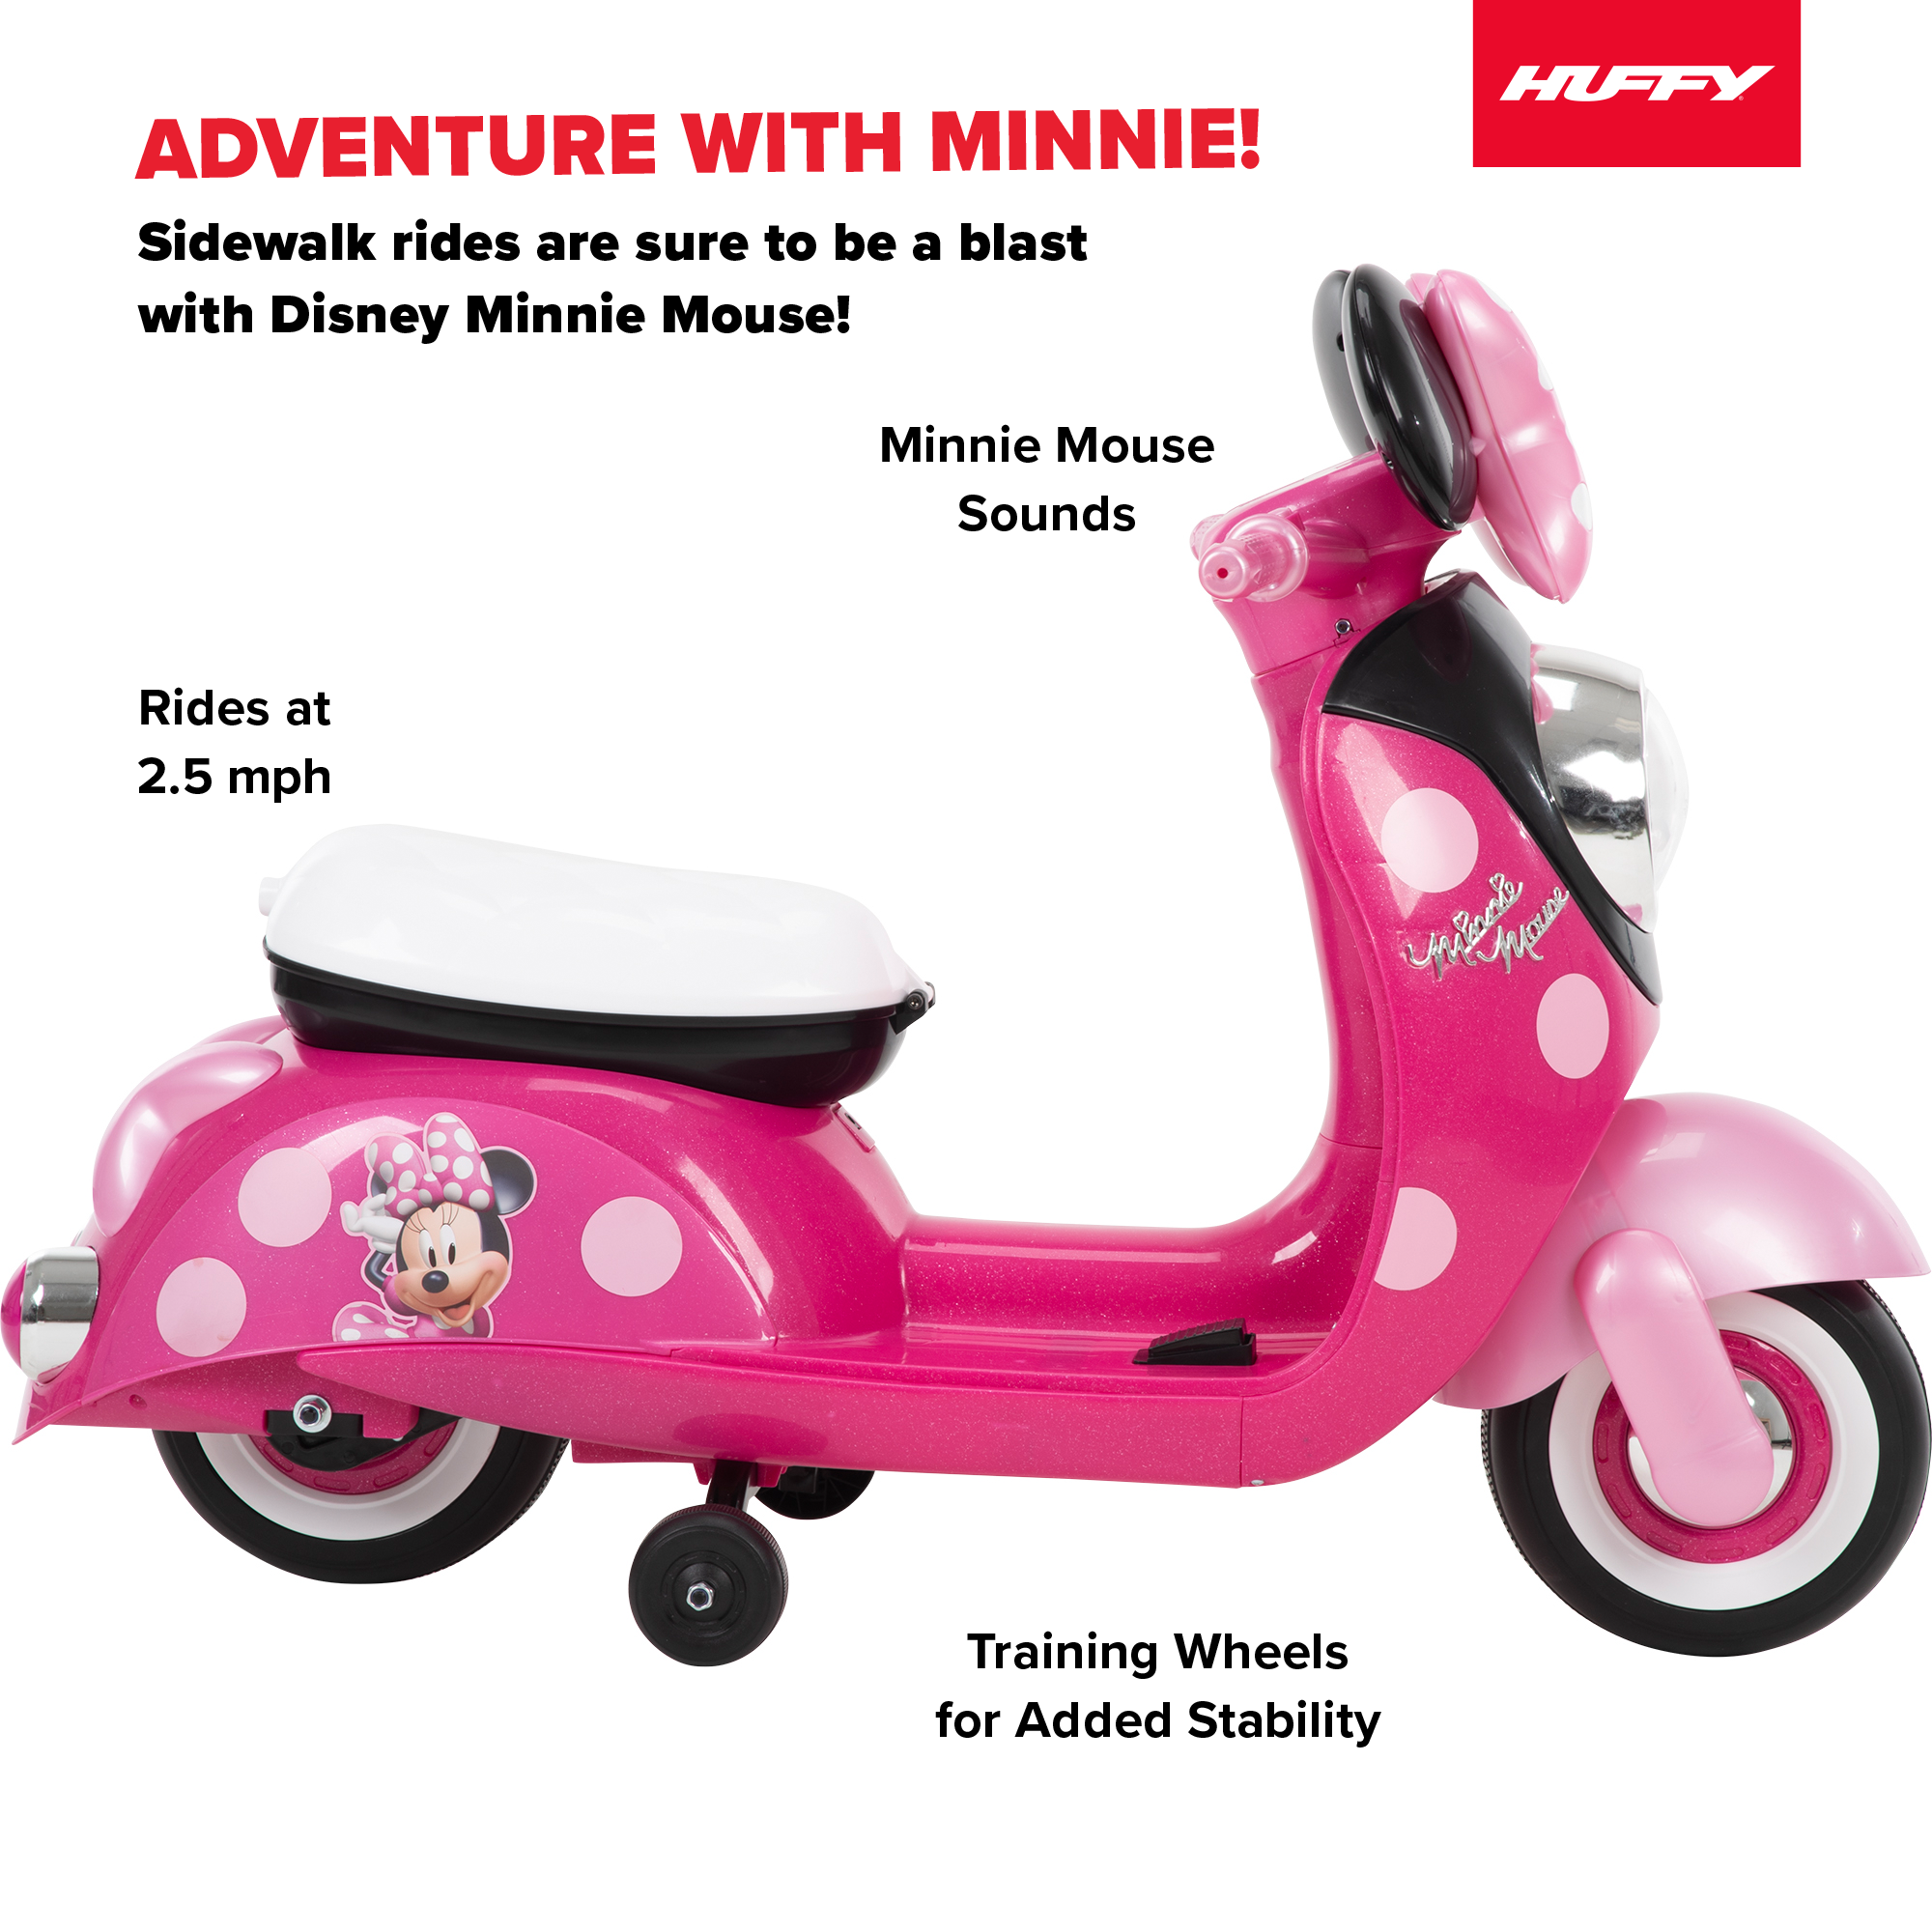 Disney Minnie Mouse 6V Euro Scooter Ride-on Battery-Powered Toy for Girls, Ages 1.5+ Years, by Huffy - image 2 of 14